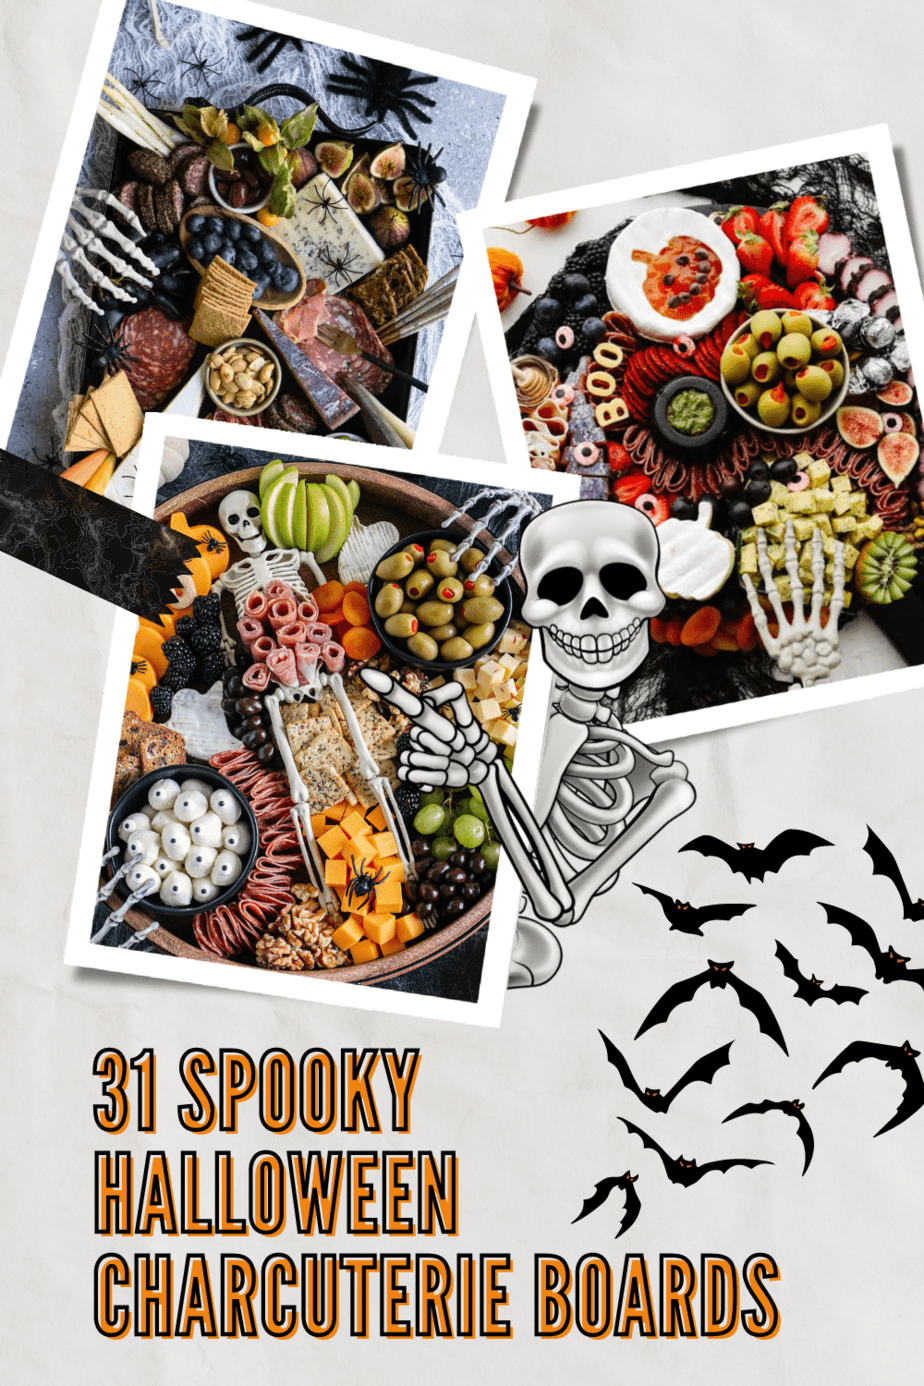 Searching for a fun and easy way to spook your guests this Halloween? Look no further than these 31 Halloween charcuterie boards! With a variety of creepy, crawly, and spooky snacks, these boards will be the perfect addition to your Halloween party. So what are you waiting for? Get started on your Halloween party planning today!